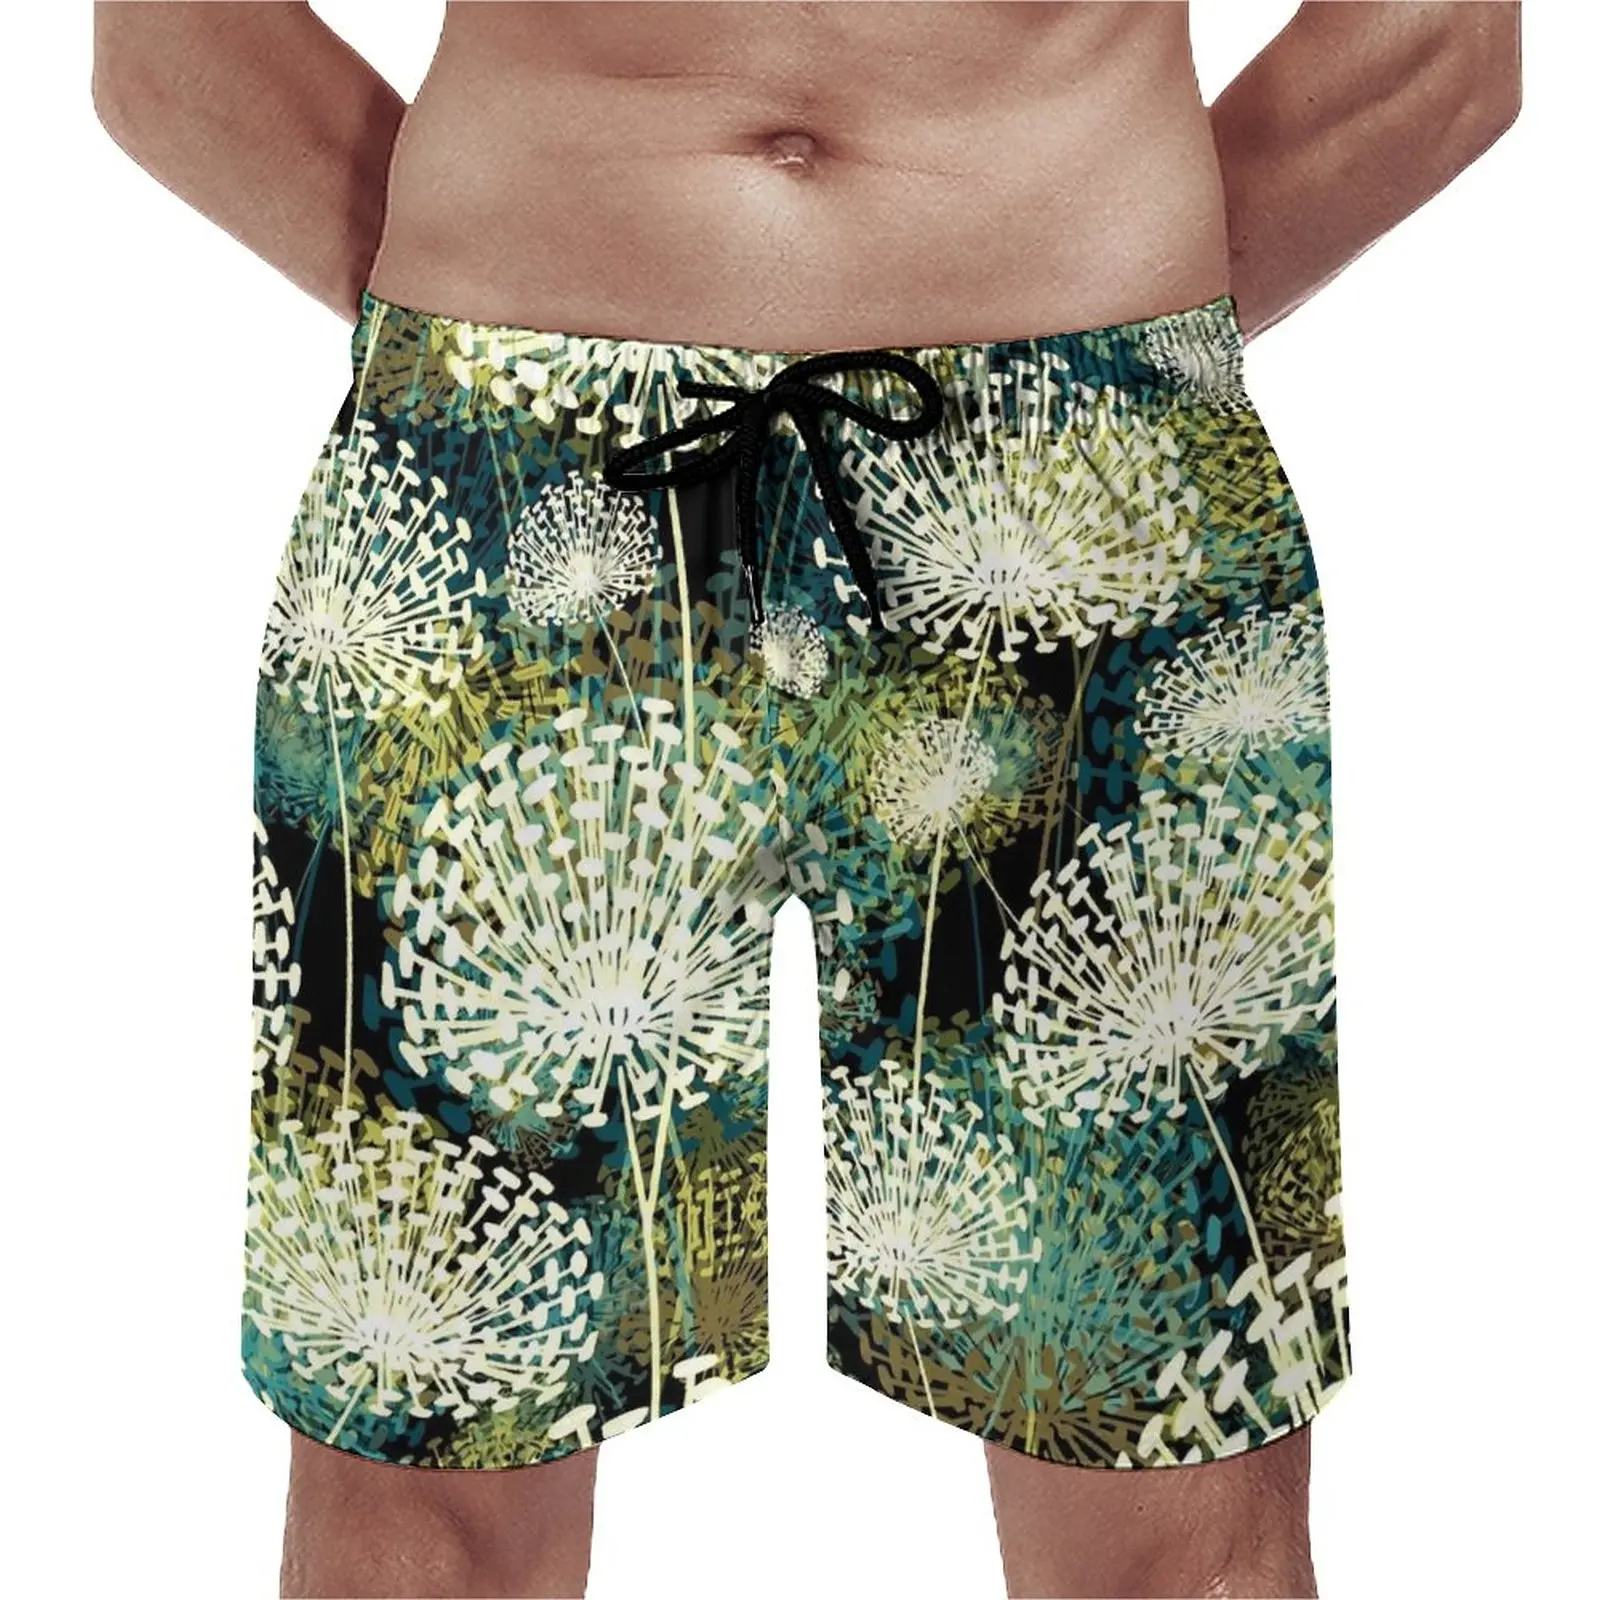 

Dandelion Board Shorts Summer Vintage Print Surfing Beach Short Pants Males Quick Dry Hawaii Printed Plus Size Swimming Trunks